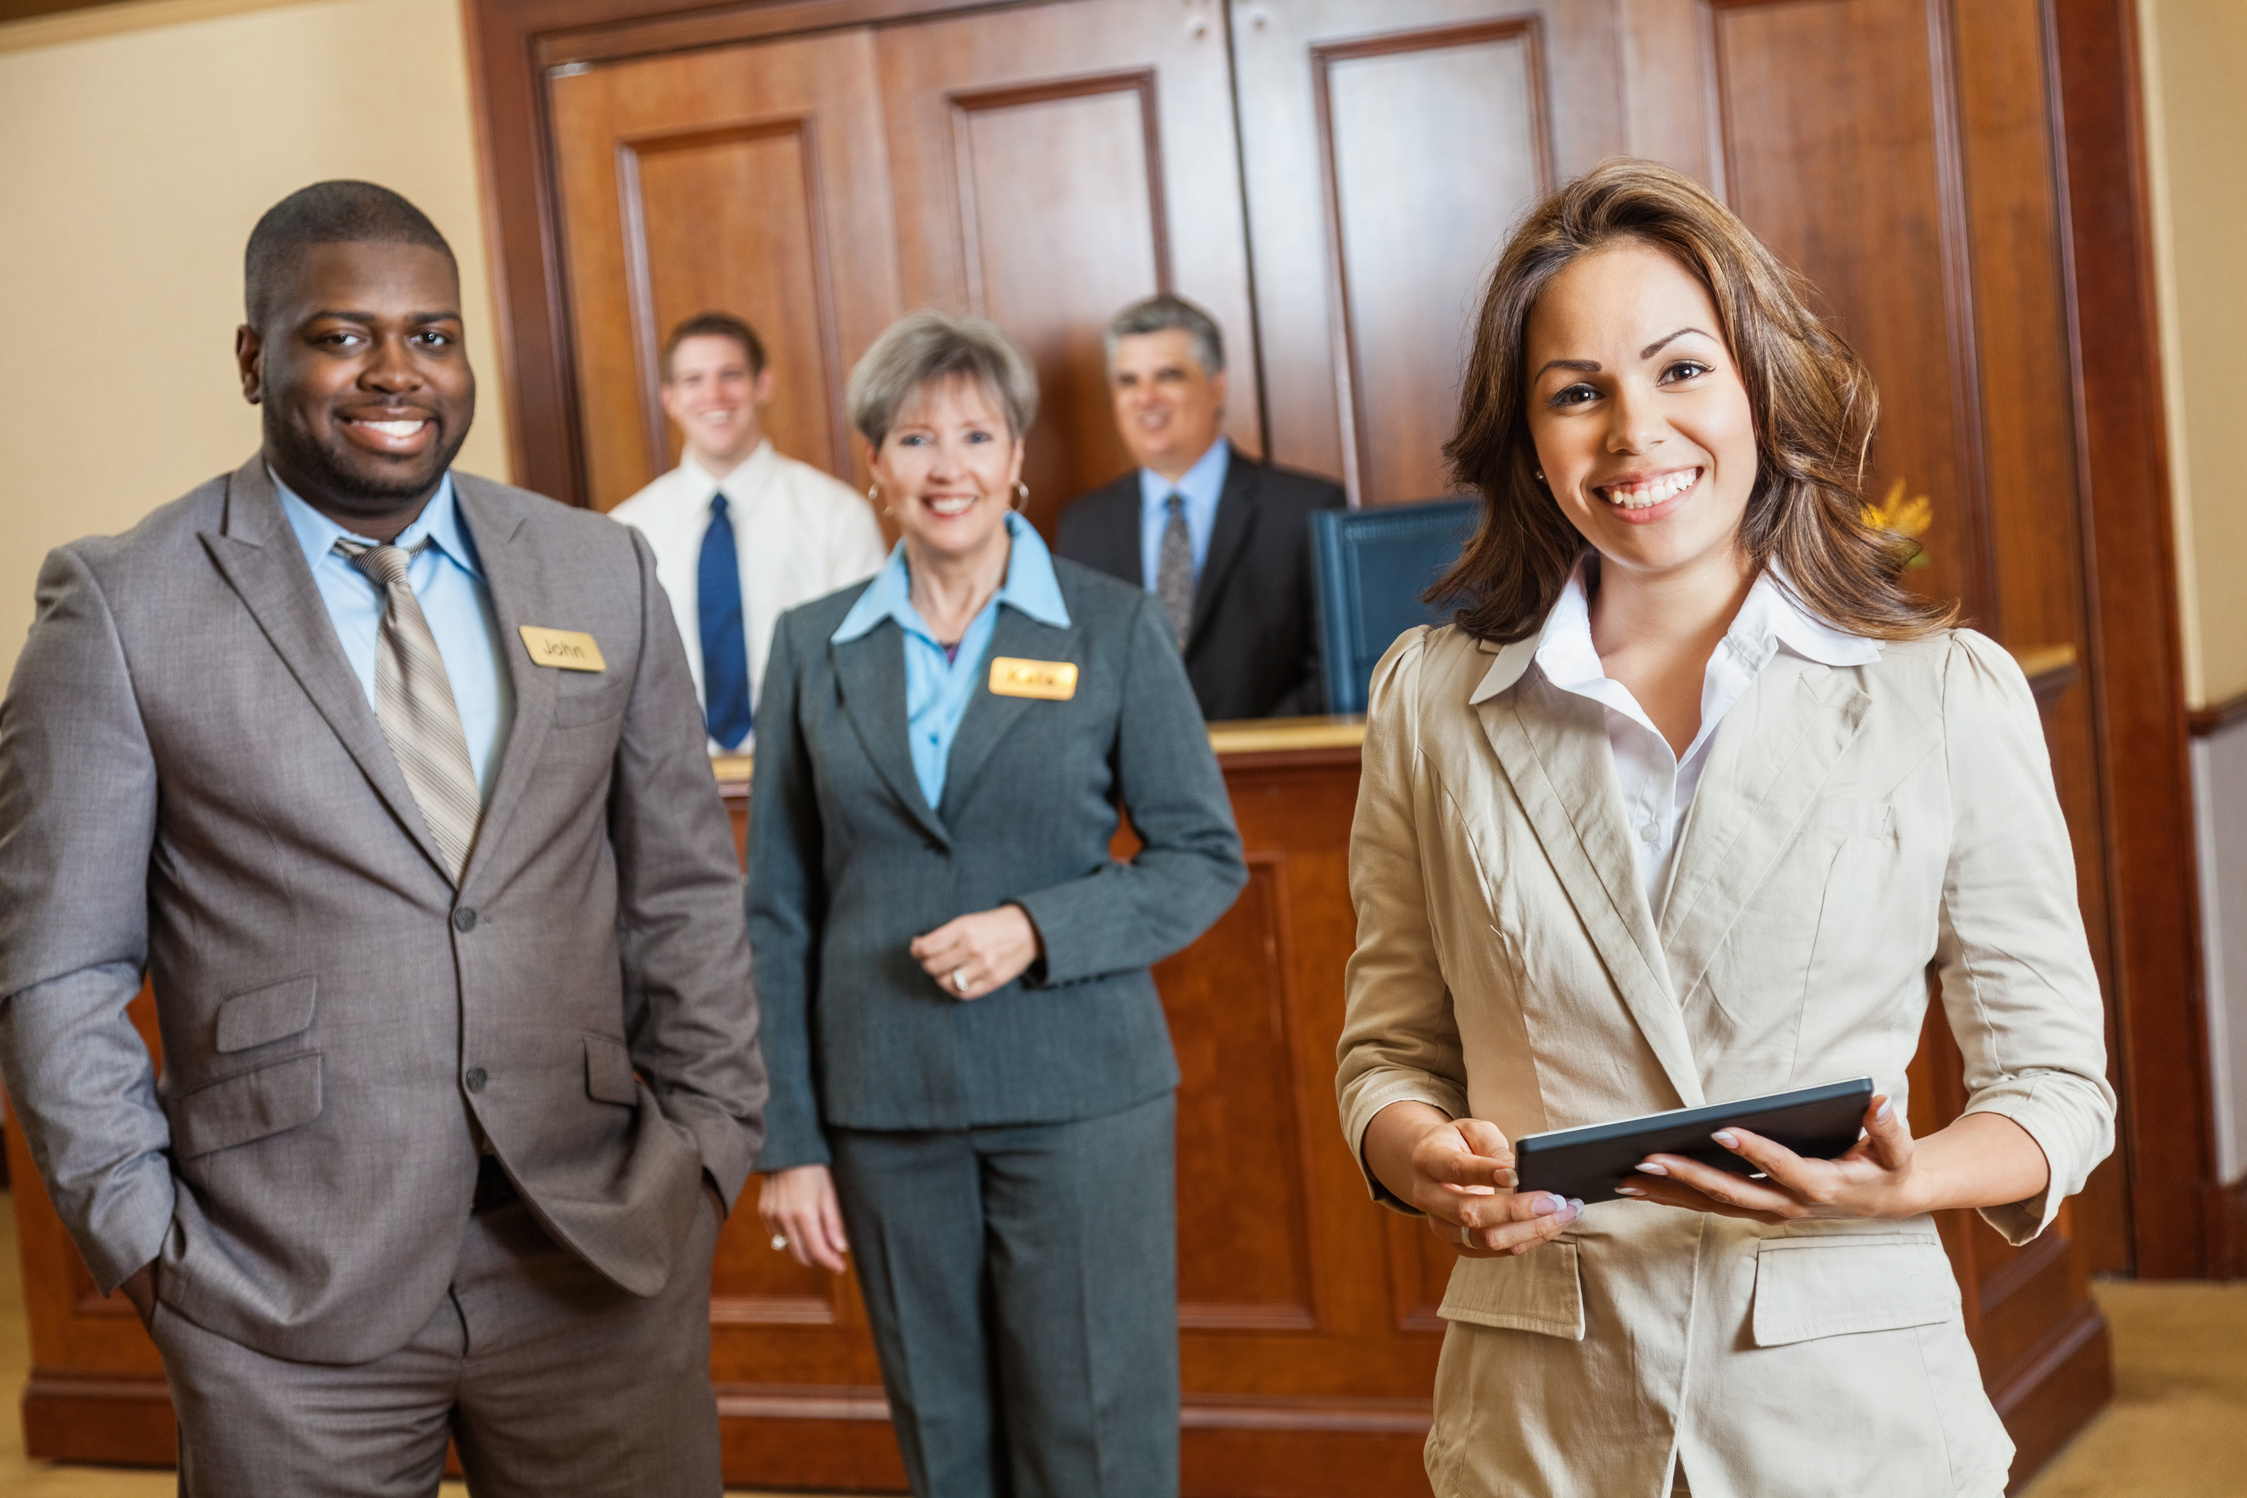 Friendly professional hotel staff with managers, clerks, and administrators